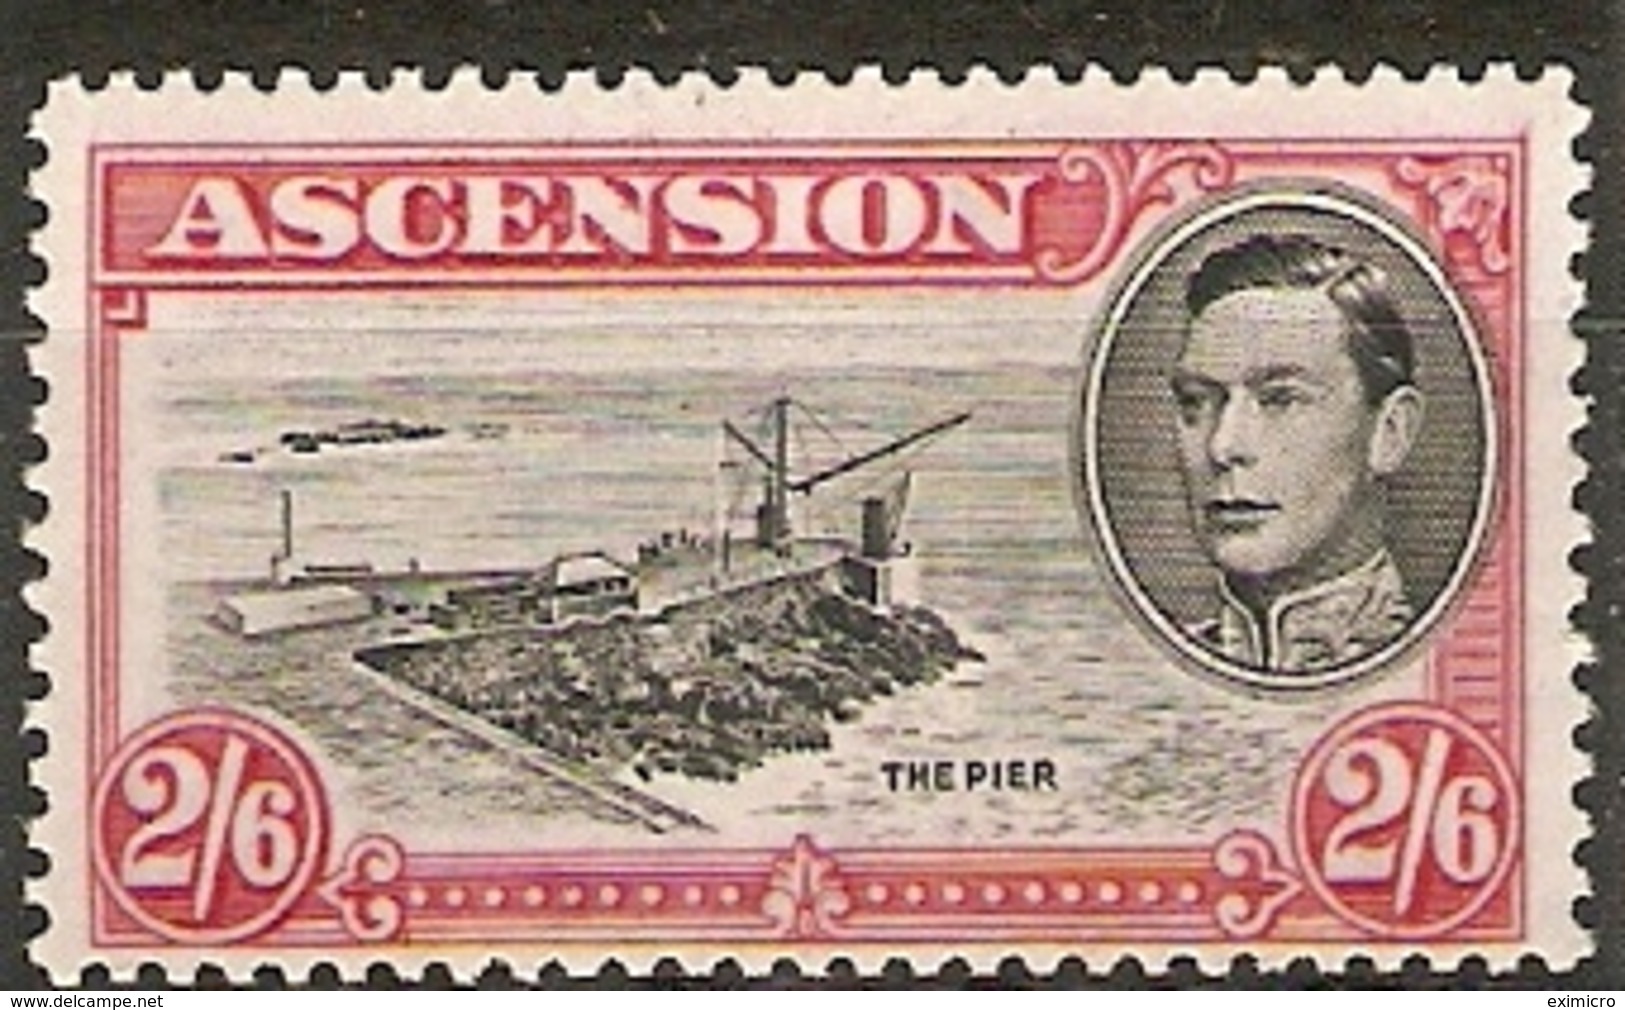 ASCENSION  1944 2s 6d PERF 13 SG 45c UNMOUNTED MINT Cat £35 - Ascension